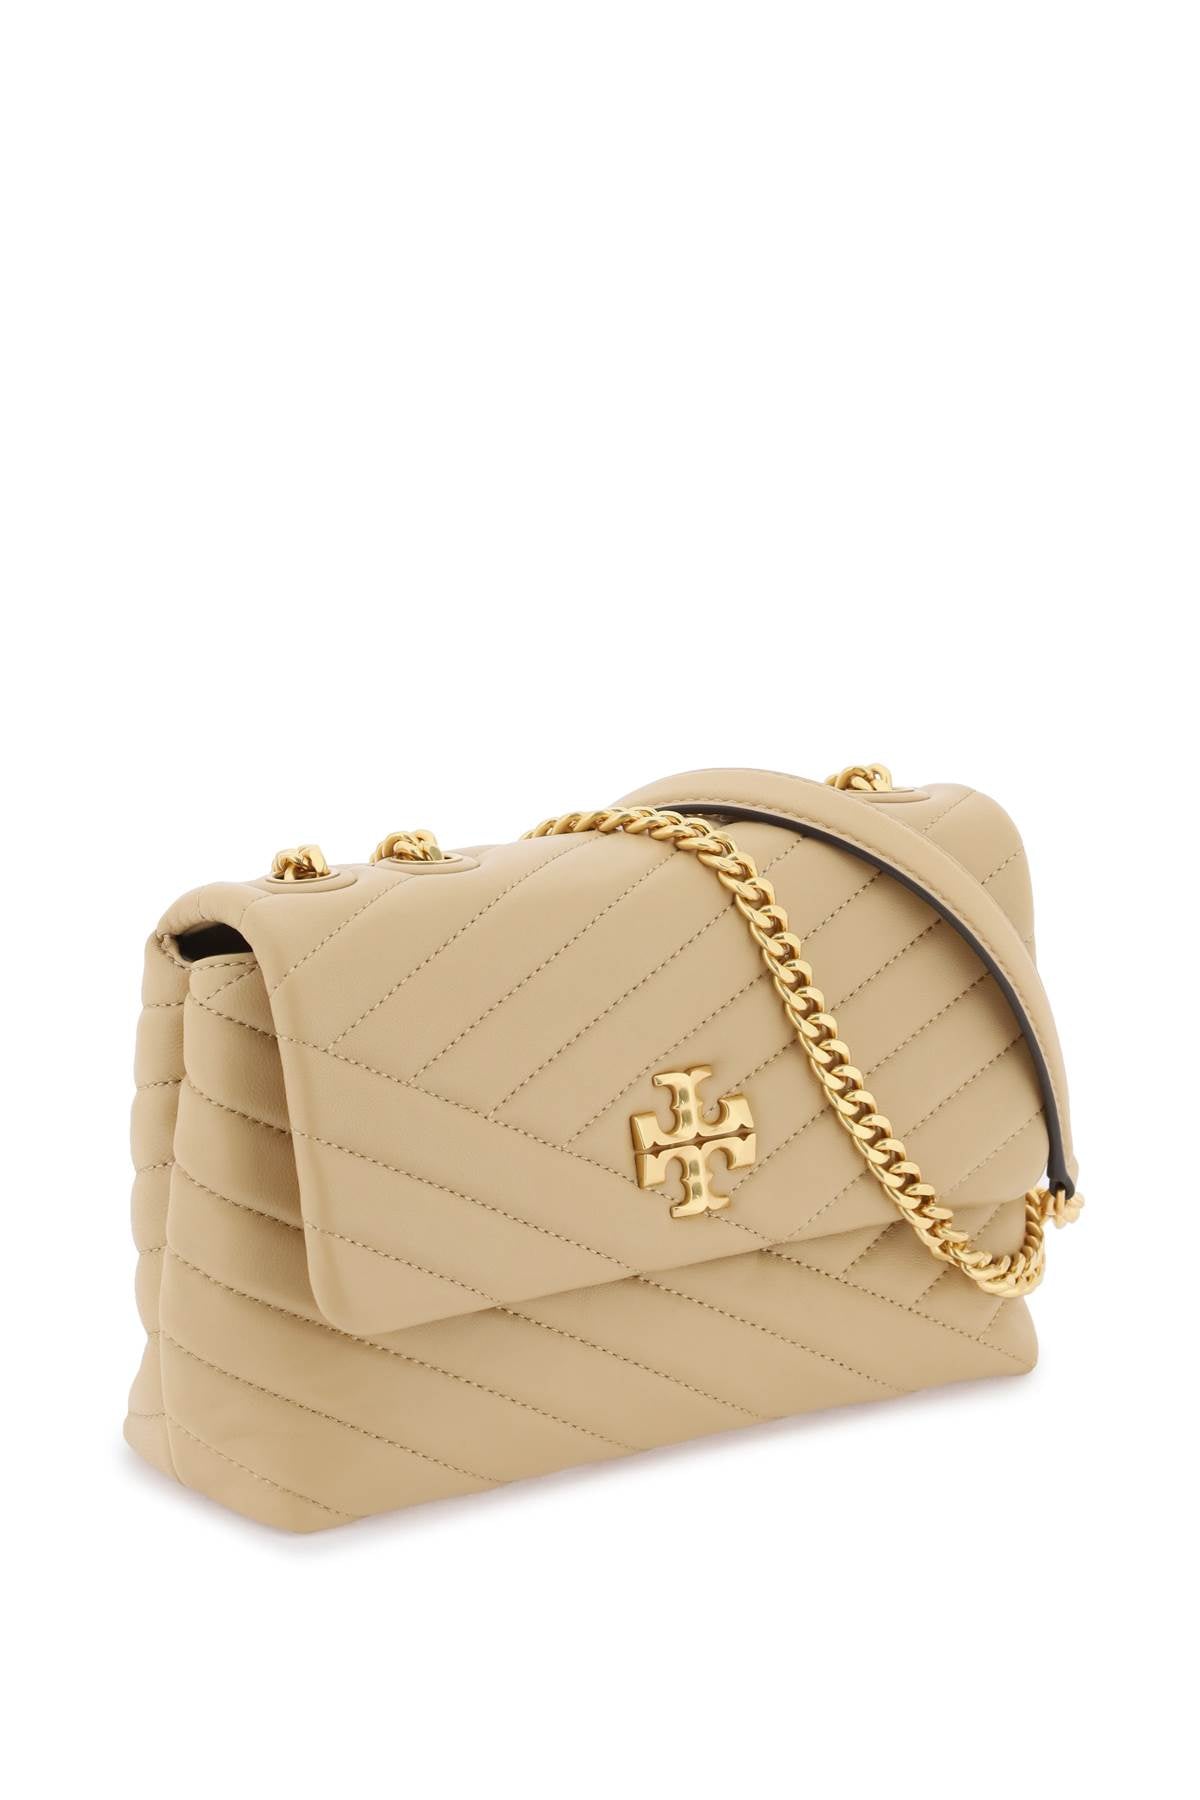 TORY BURCH Small Kira Quilted Leather Shoulder Bag in Tan with Chevron Detail and Adjustable Chain Strap